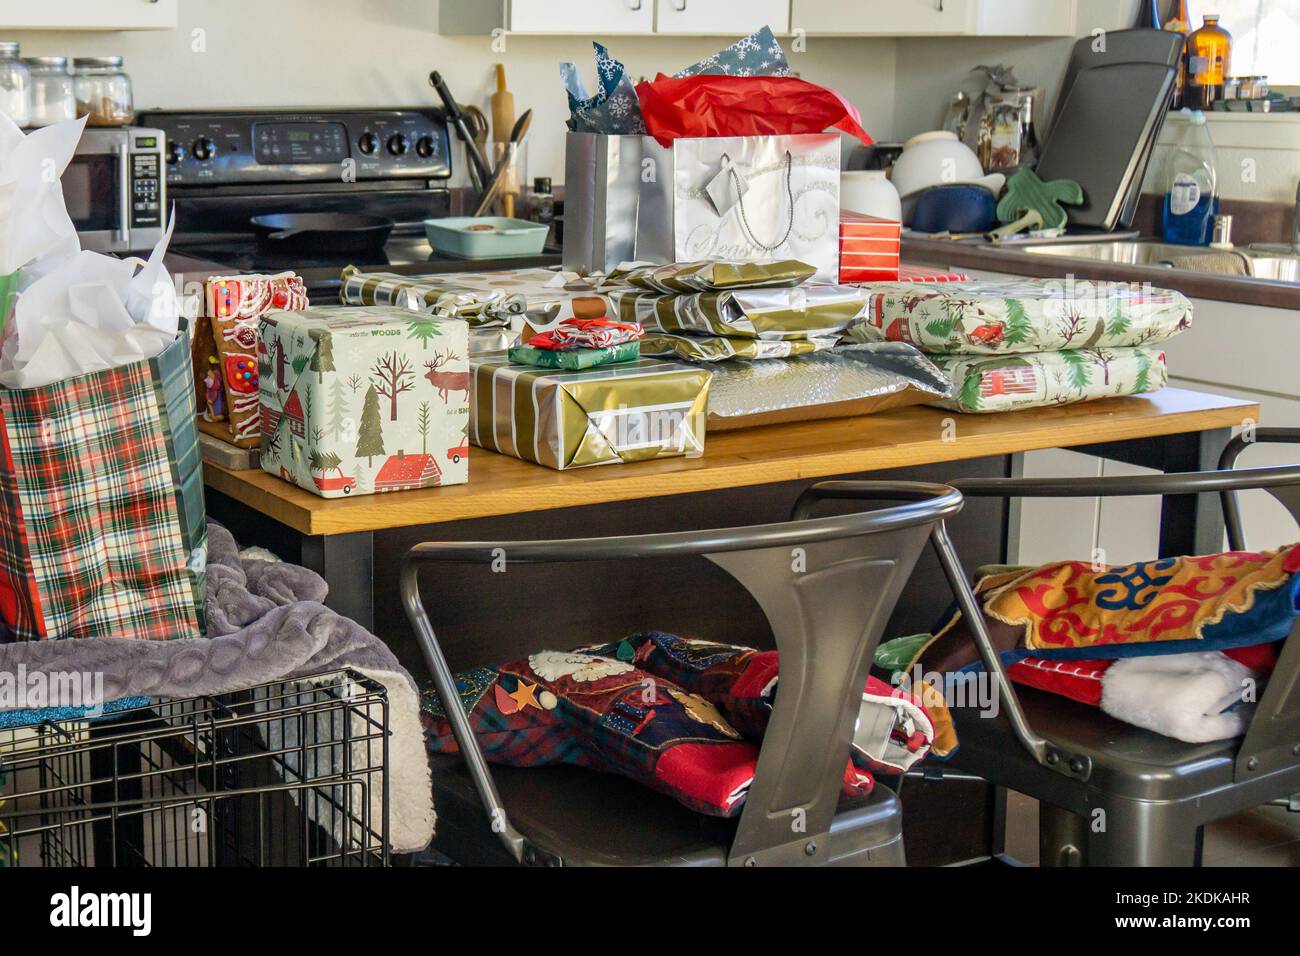 Christmas presents on an island in a cluttered kitchen. Stock Photo